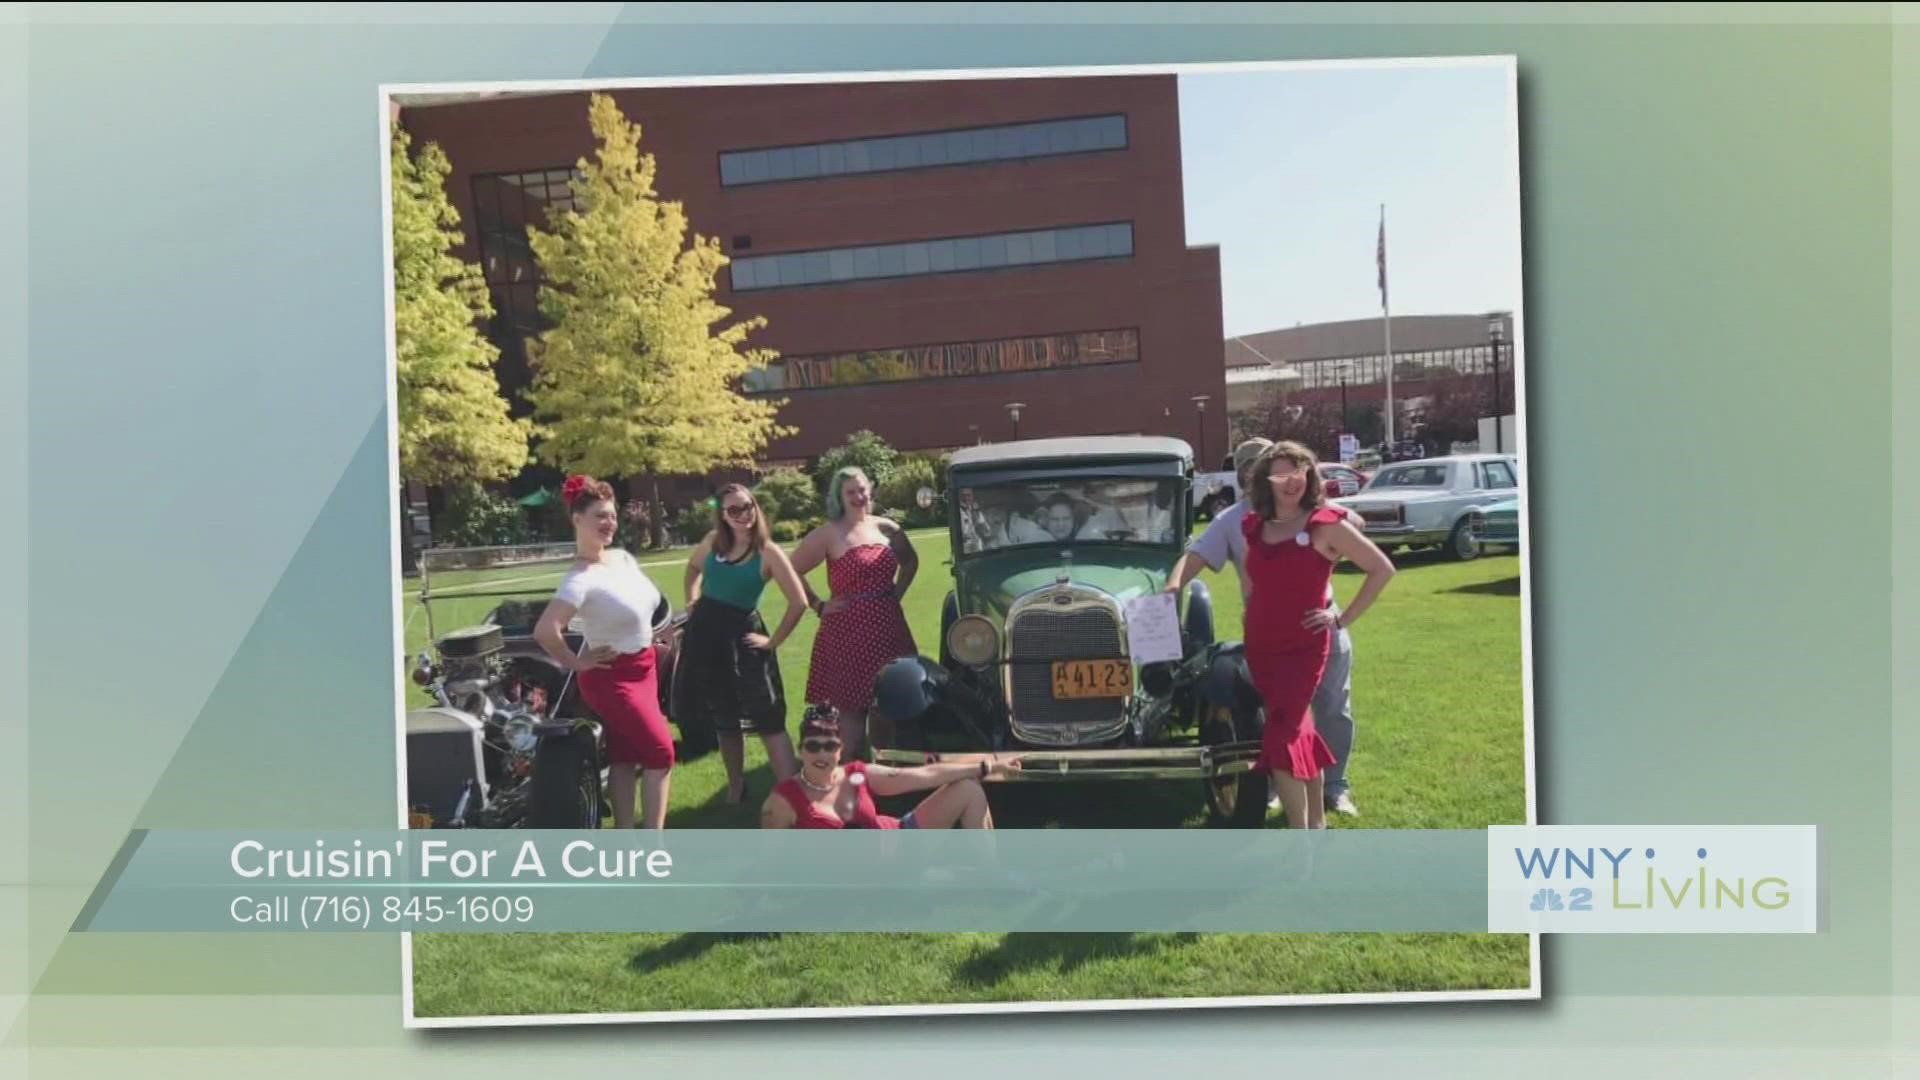 WNY Living - August 13 - Roswell Park Comprehensive Cancer Center (THIS VIDEO IS SPONSORED BY ROSWELL PARK COMPREHENSIVE CANCER CENTER)